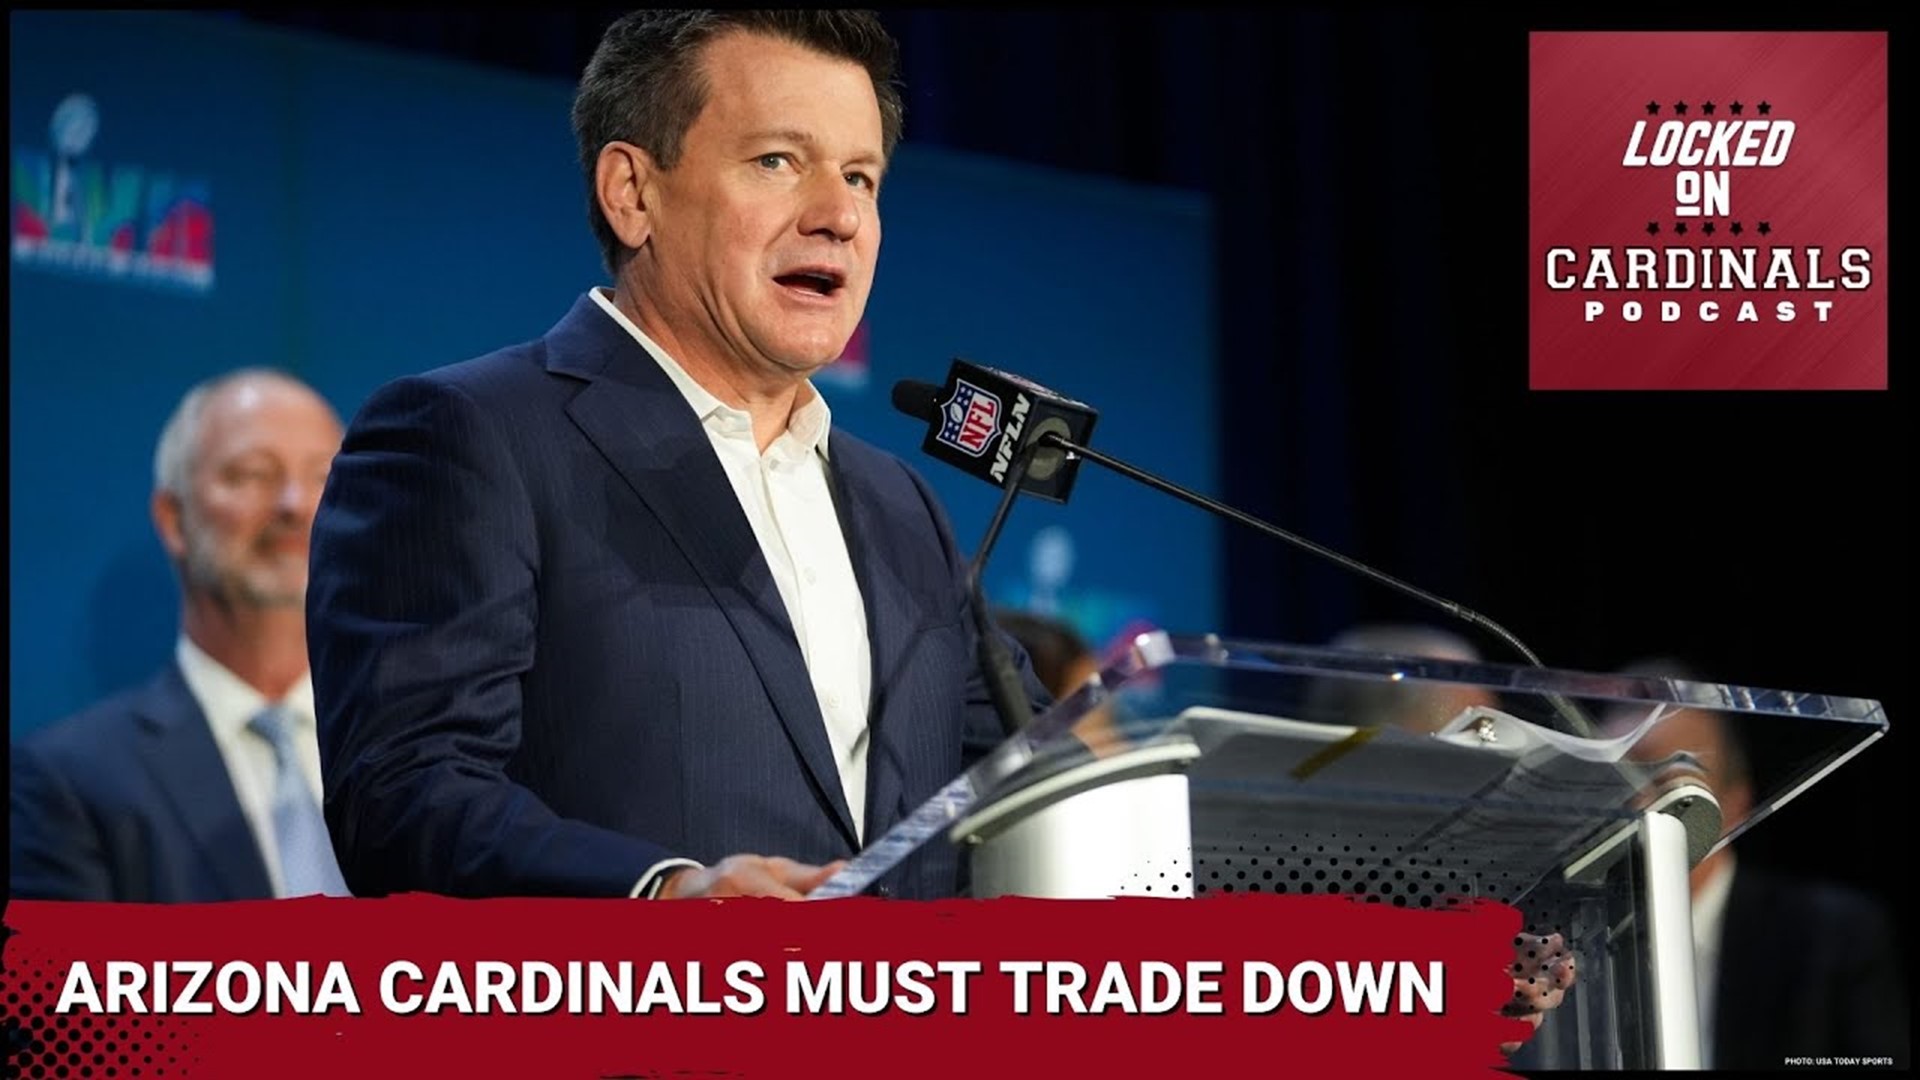 Arizona Cardinals have had a tough road the last handful of drafts. Because of that, the former GM Steve Keim should move the third overall pick.